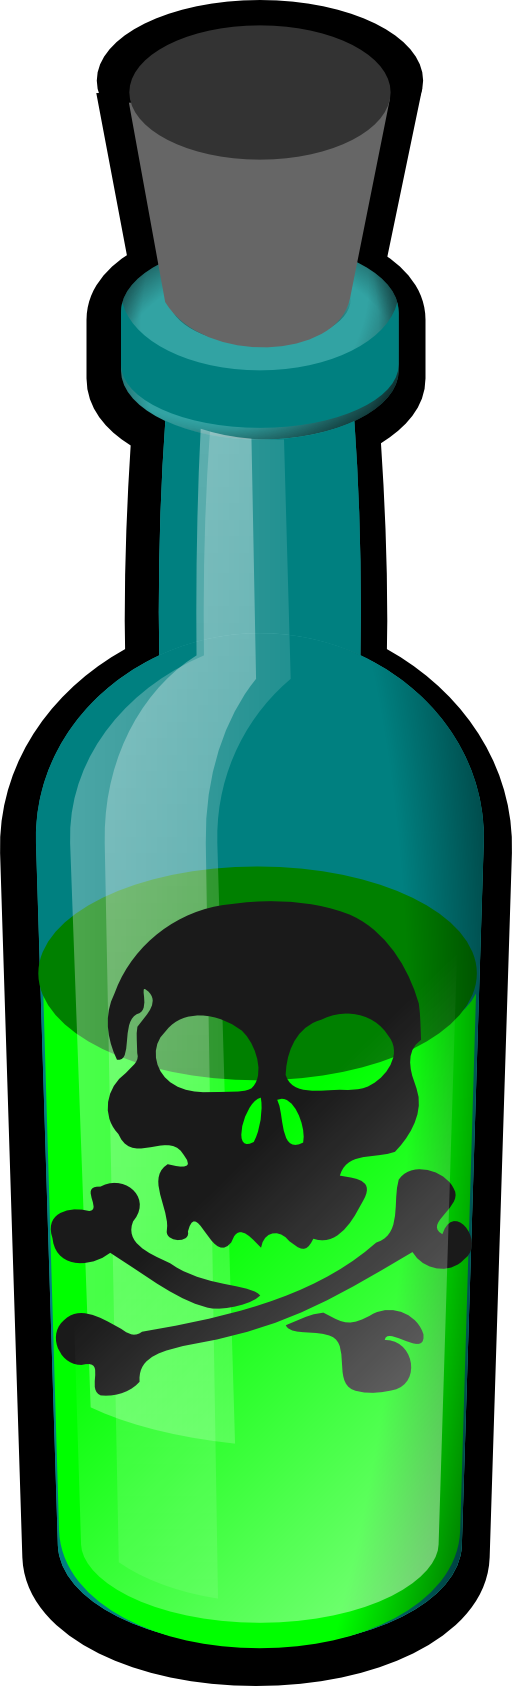 Bottle i royalty free. Death clipart poison